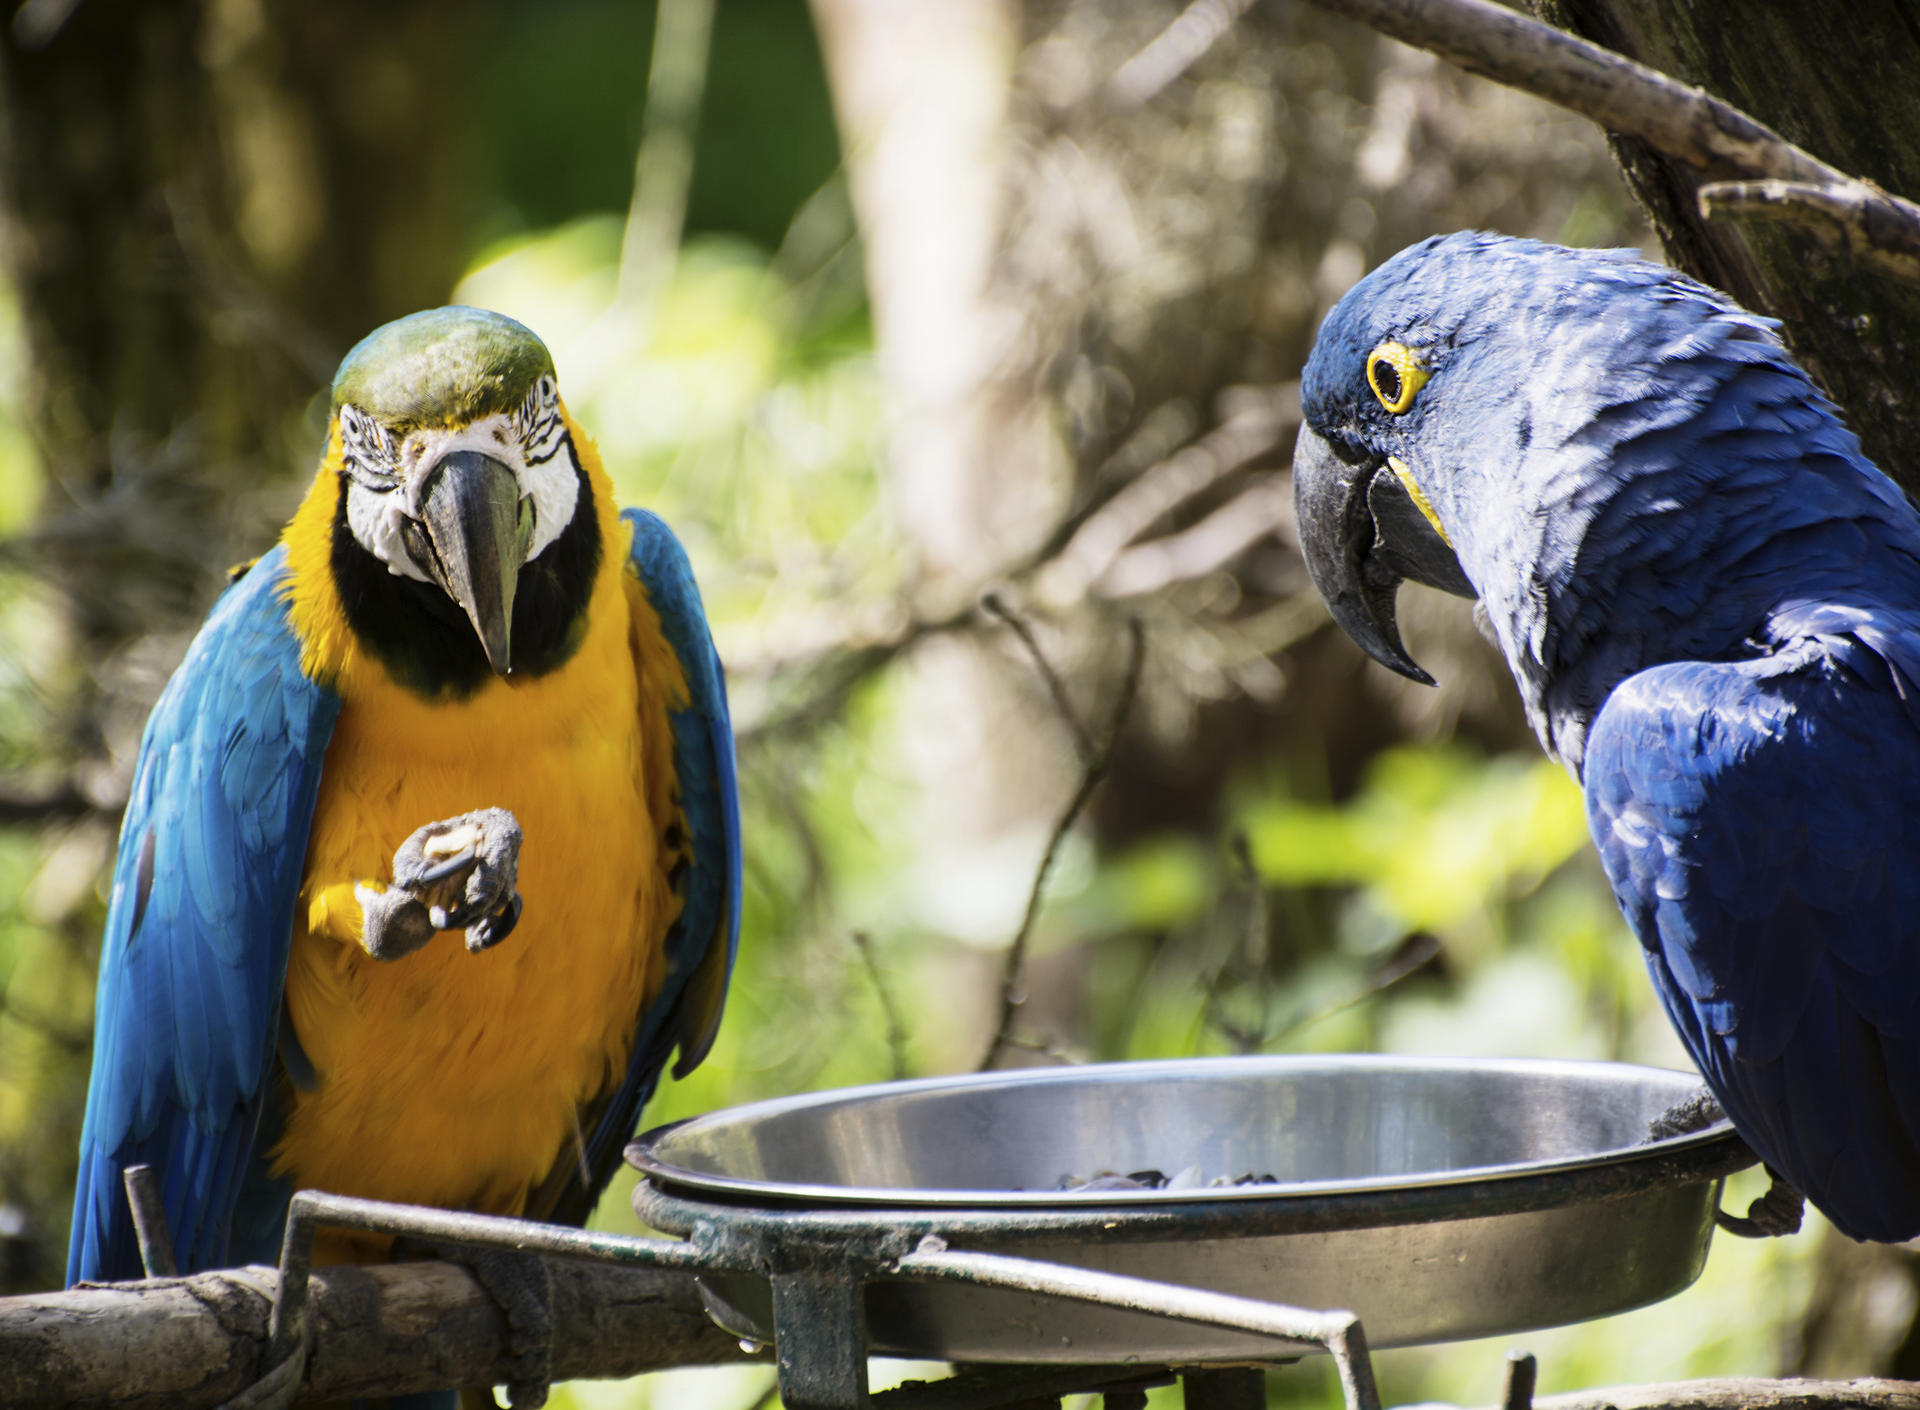 Parrots should be fed a diet of pellets and organic seeds. Photos: Thinkstock